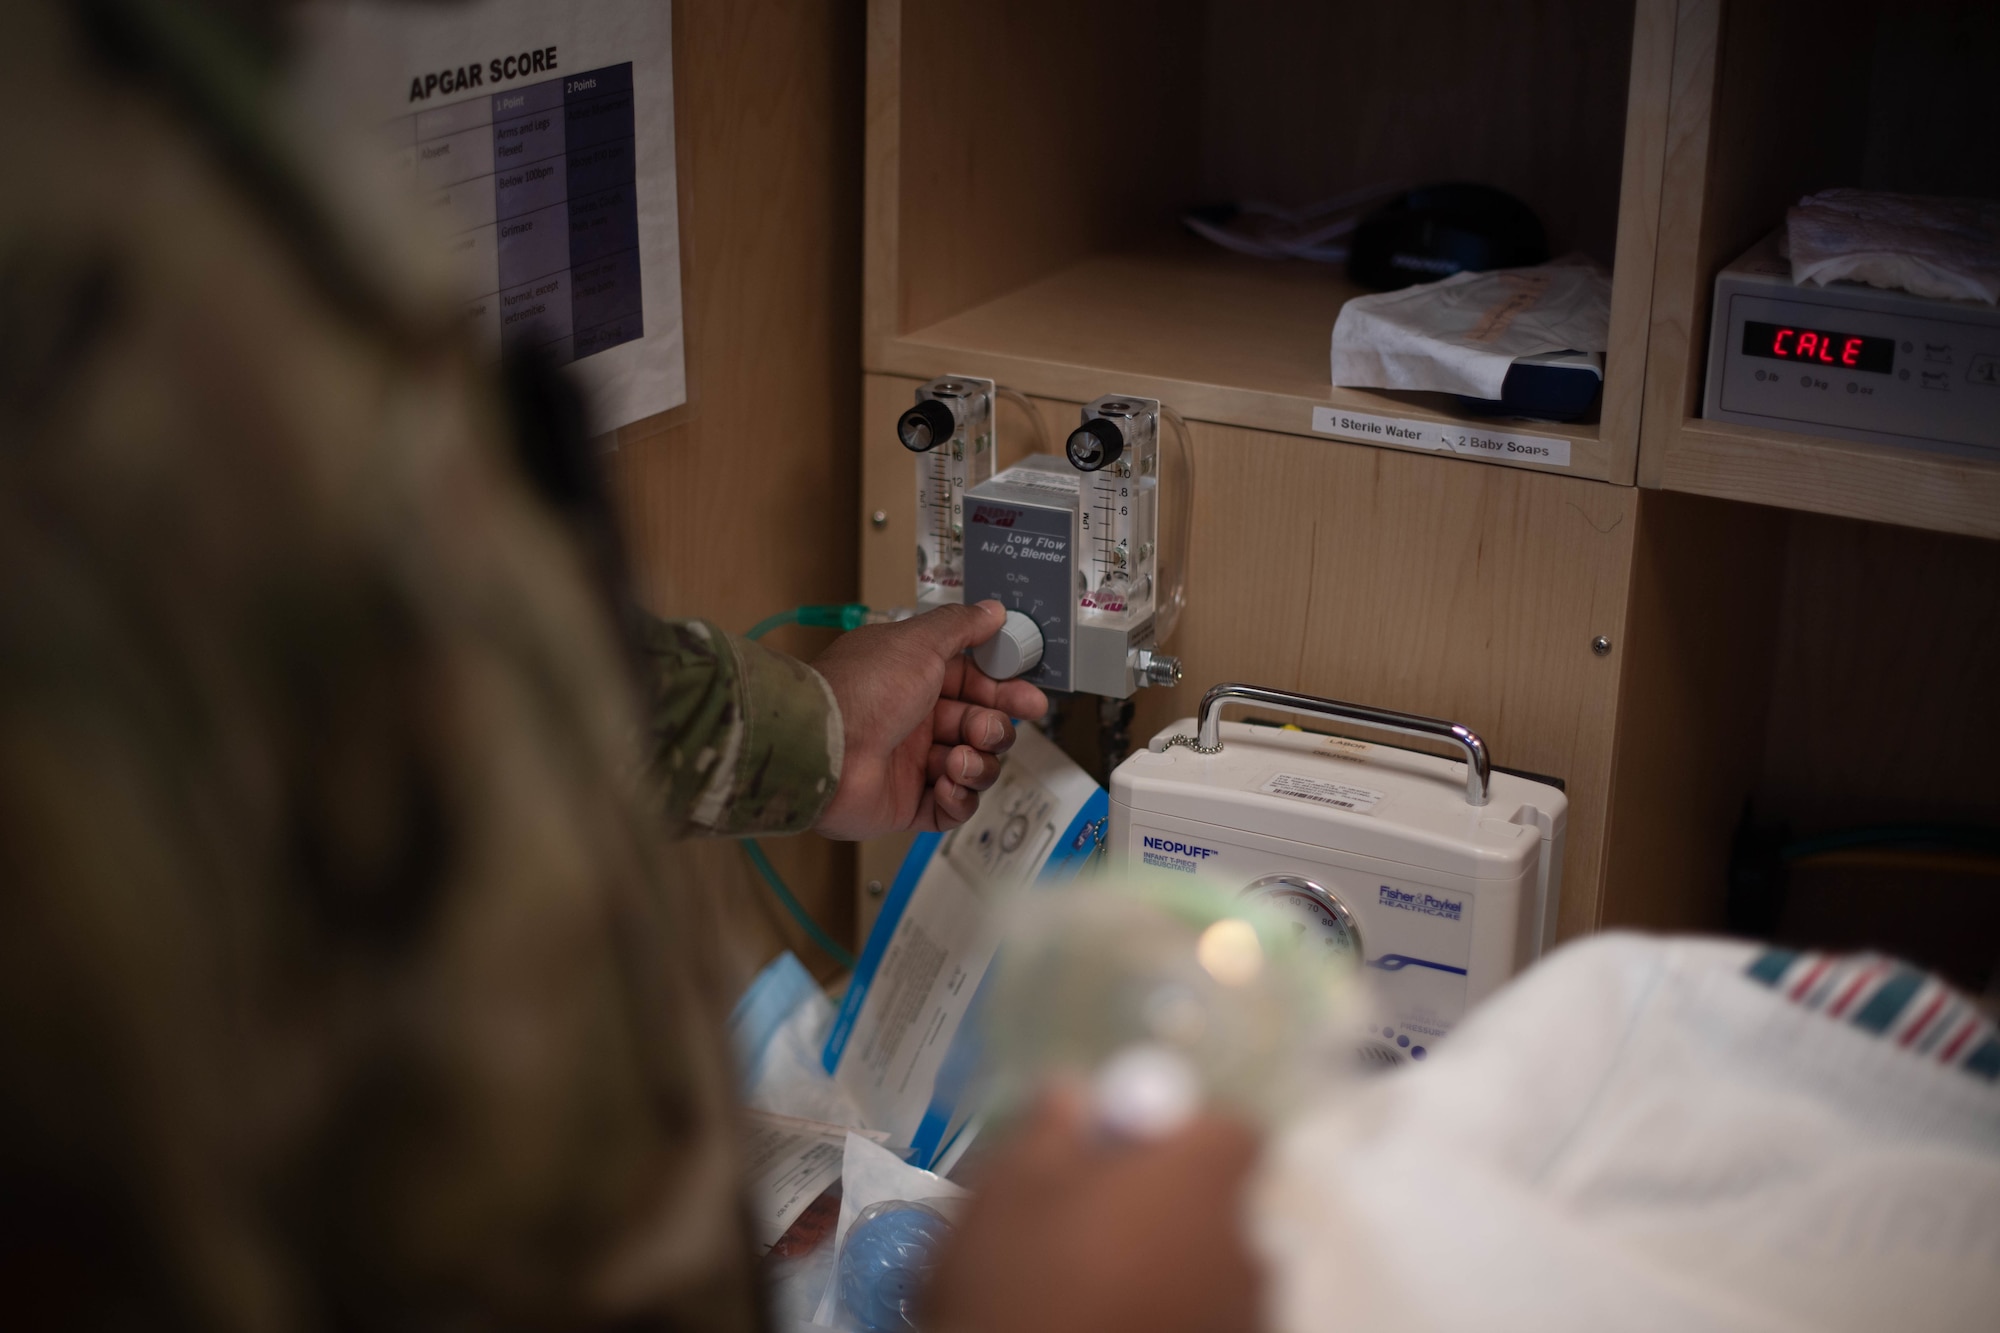 U.S. Air Force Staff Sgt. Lamaar Melvin, 86th Medical Squadron Labor and Delivery supervisor, adjusts the flow of oxygen through an infant oxygen mask to ensure it is in good condition at Landstuhl Regional Medical Center, Nov. 9, 2021. This piece of equipment is used to help give a newborn child oxygen in cases that the child has difficulty breathing. (U.S. Air Force photo by Airman Jared Lovett)